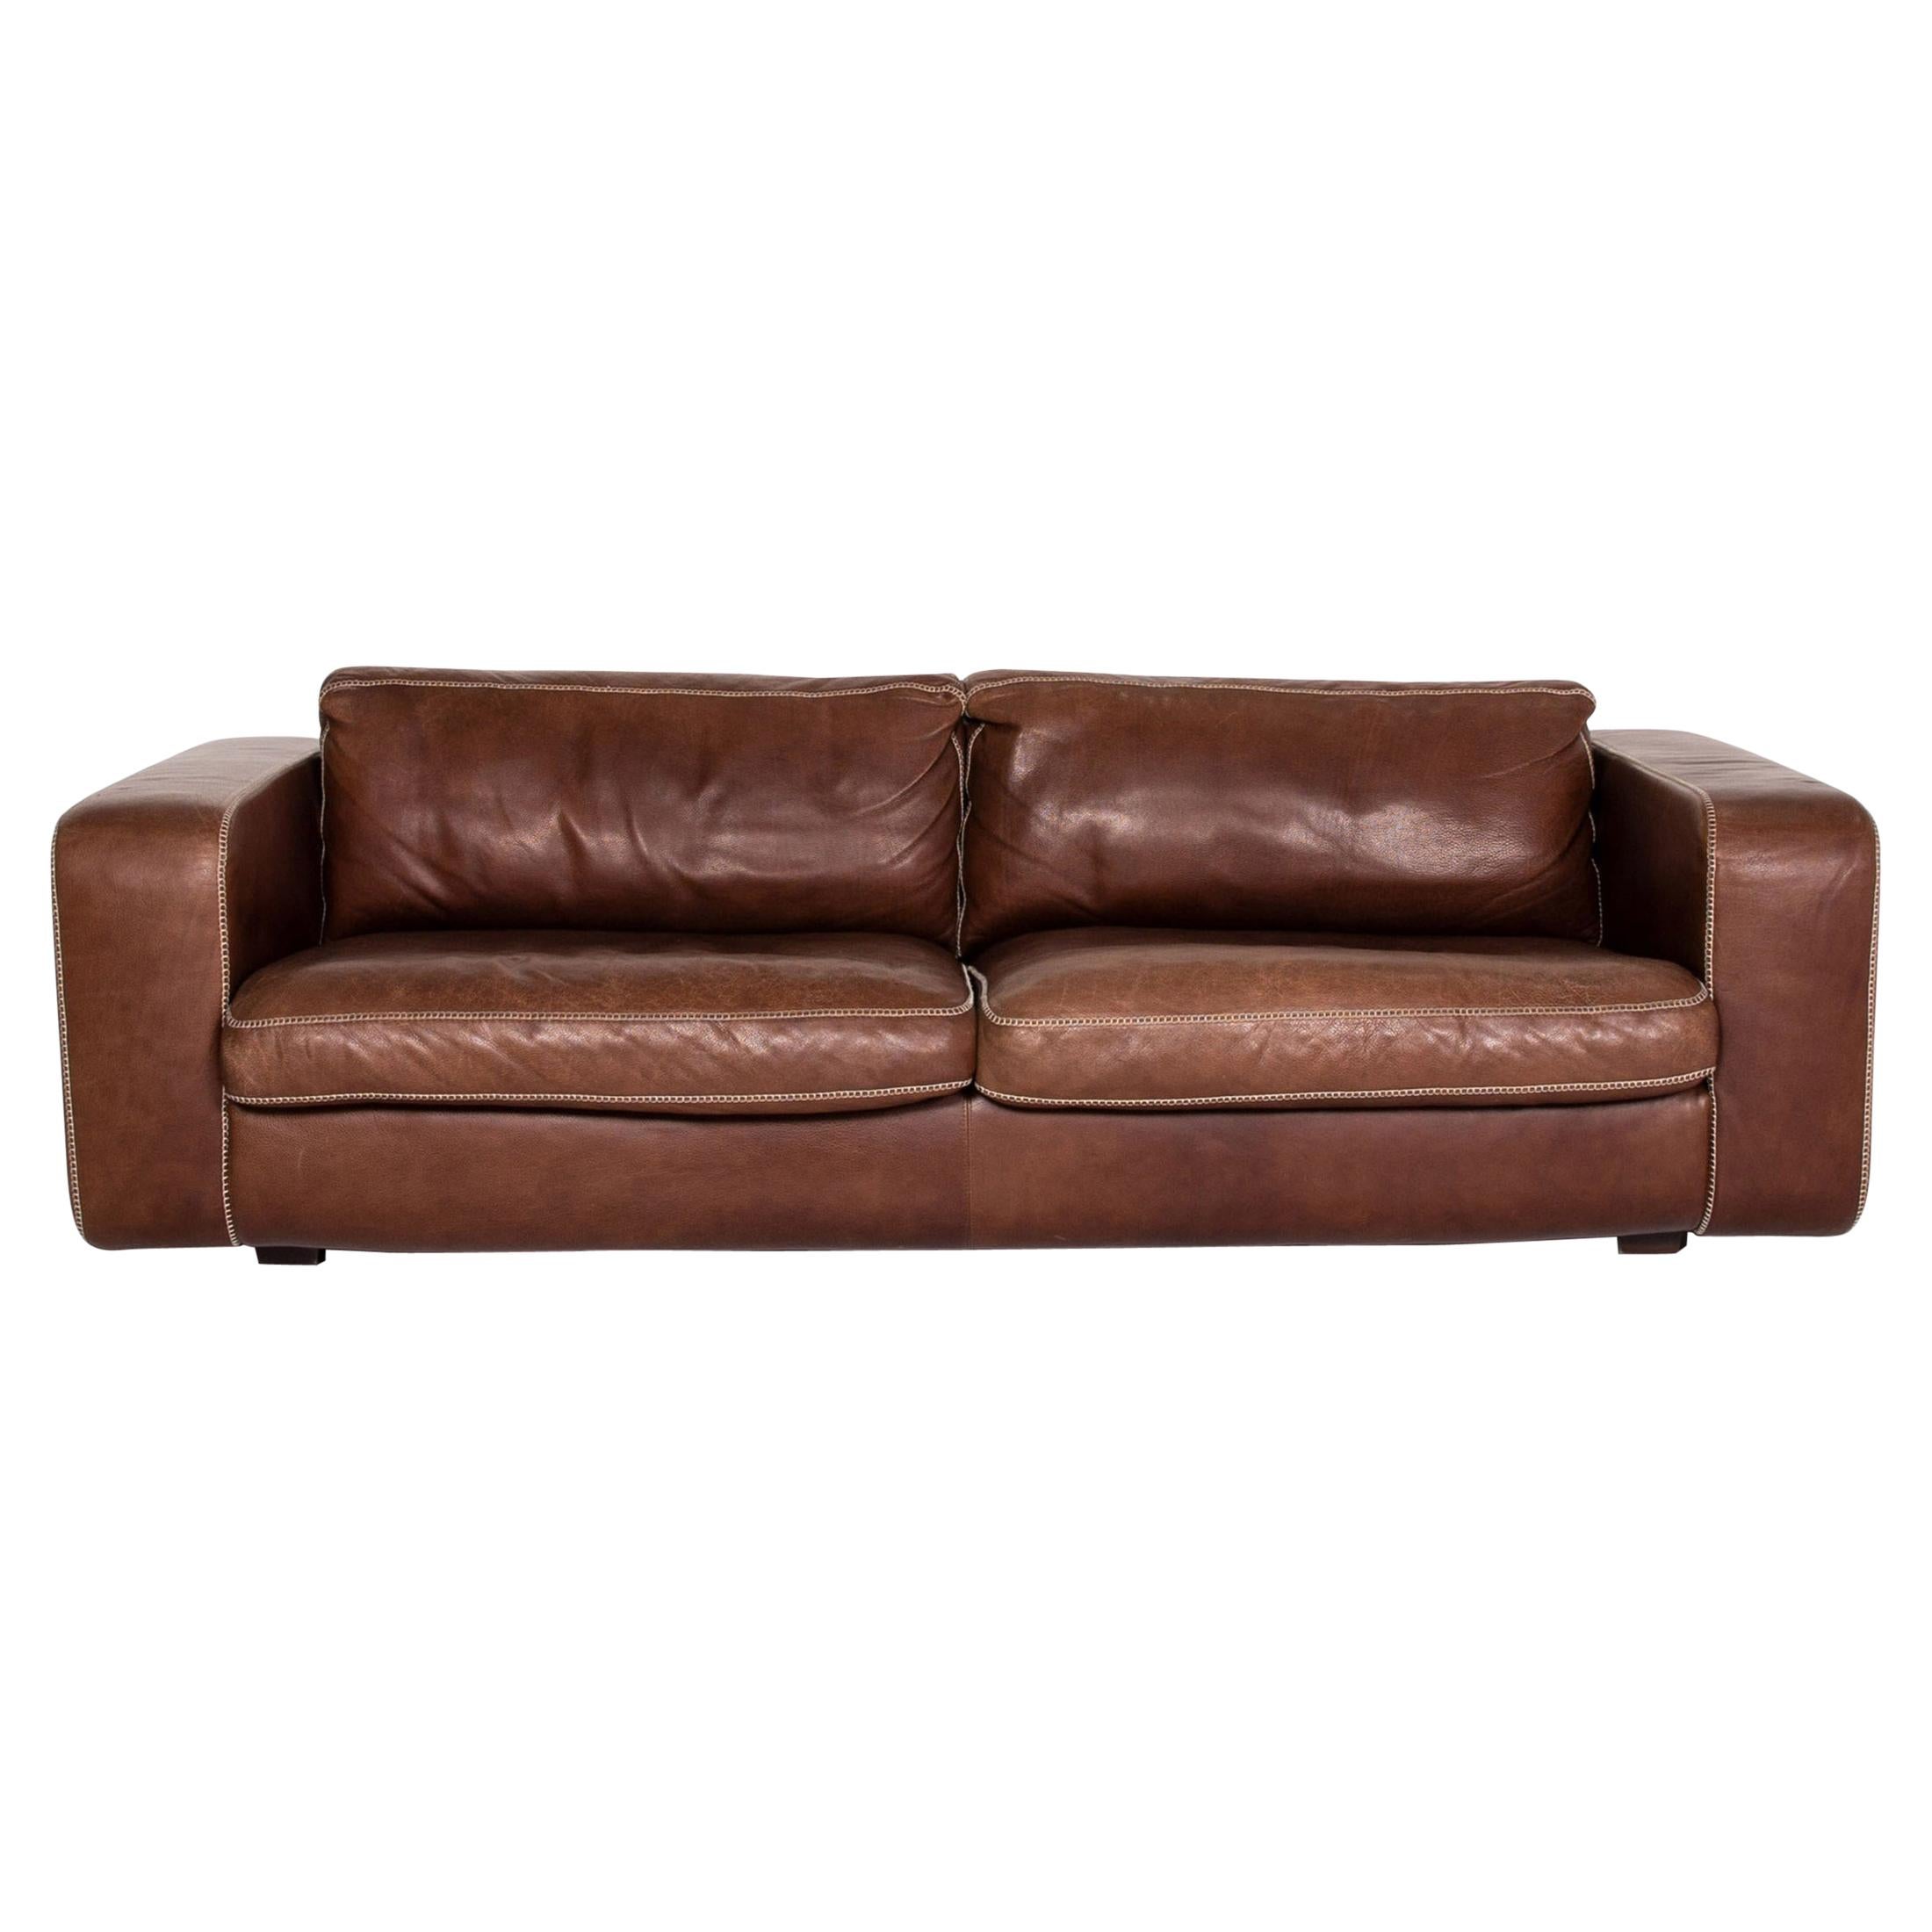 Machalke Valentino Leather Sofa Brown Three-Seat Couch For Sale